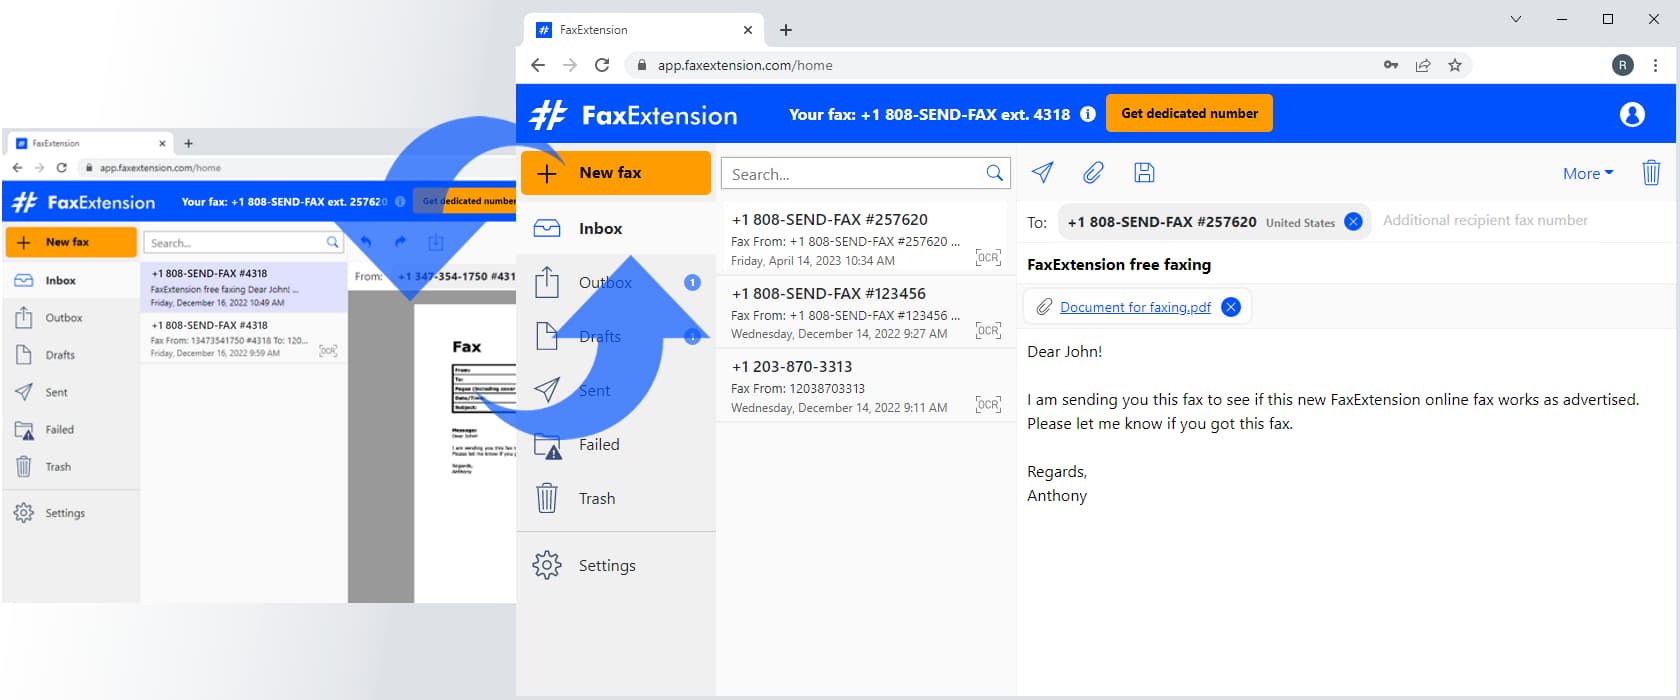 FaxExtension - faxing between business fax numbers